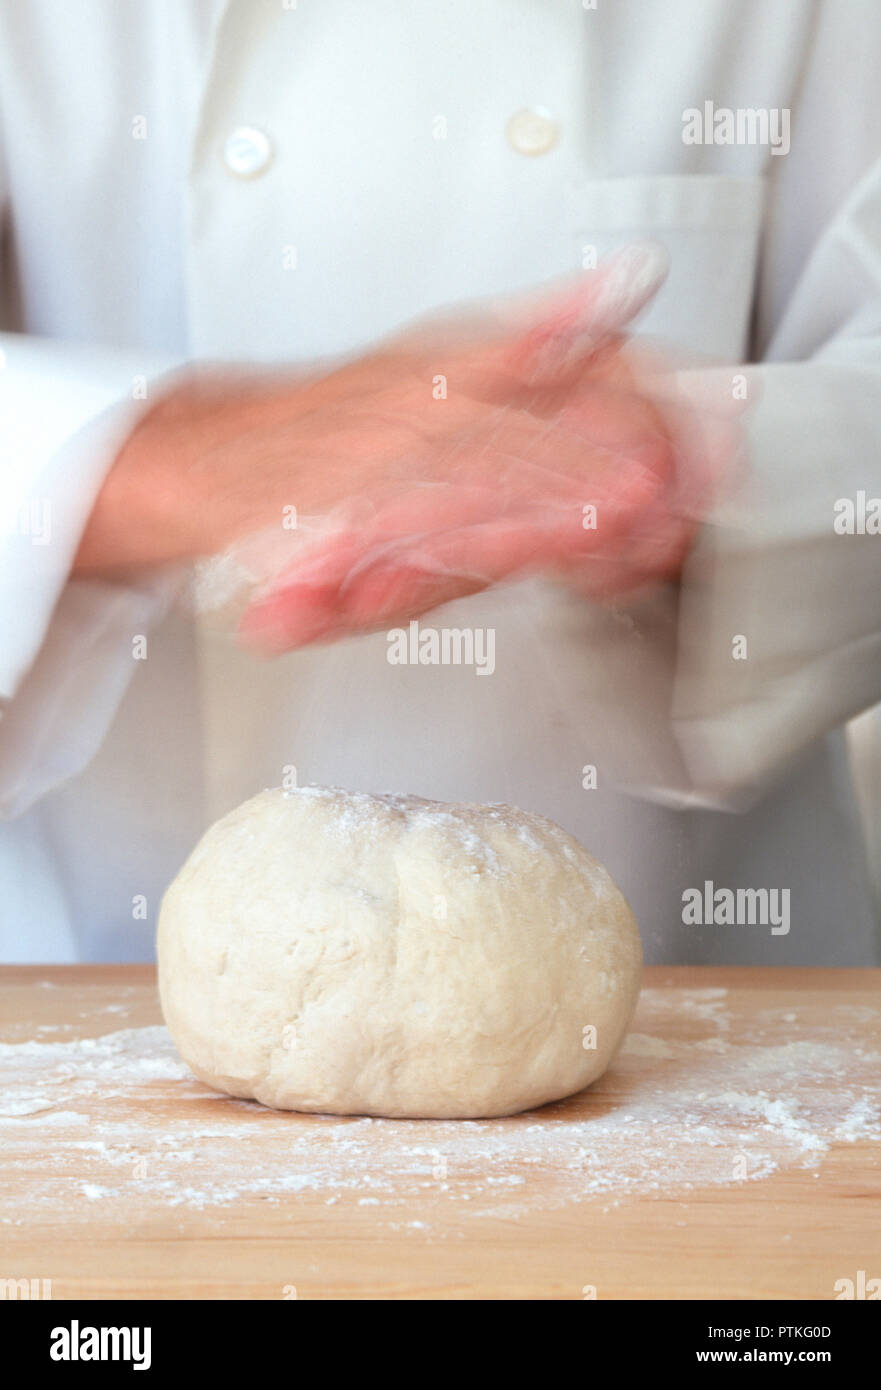 Pastry chef flouring his hand and dough, USA Stock Photo